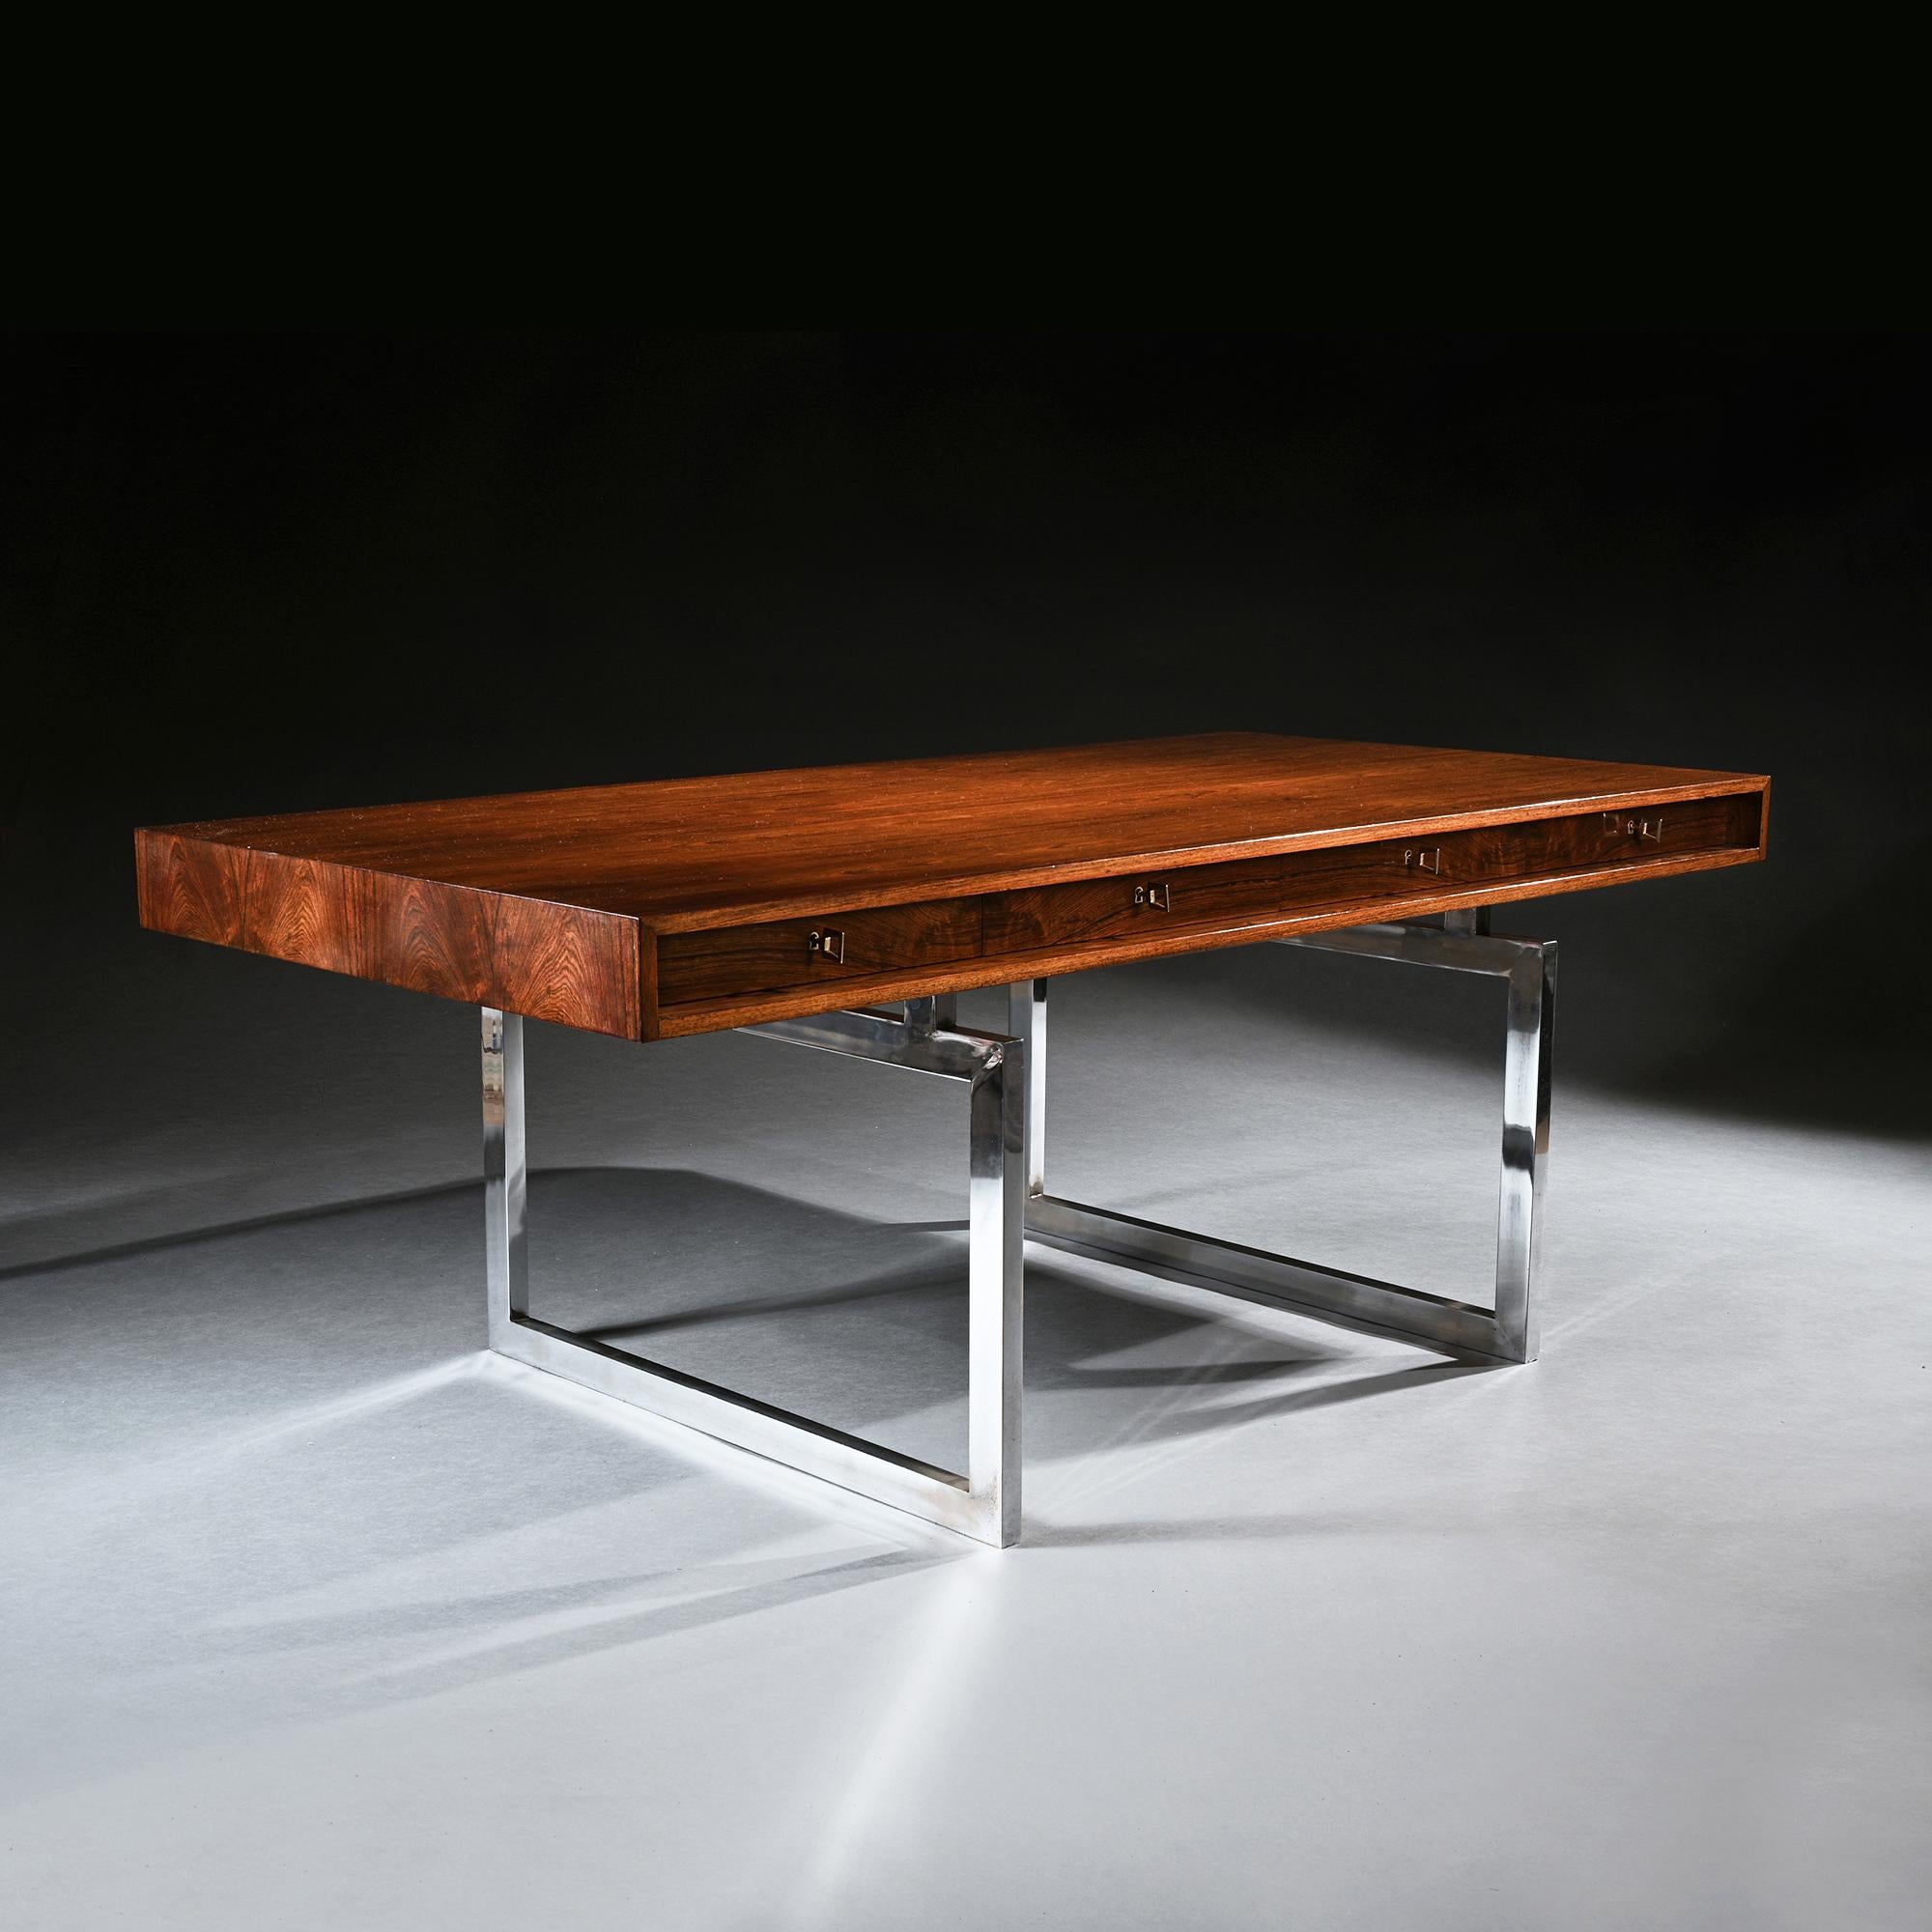 A rare Bodil Kjaer Rio rosewood four drawer writing desk model 901 for E. Pedersen & Son Denmark on chrome steel base.

Denmark circa 1959.

It doesn’t get much more iconic than this….of Scandinavian origin designed by the renowned Danish